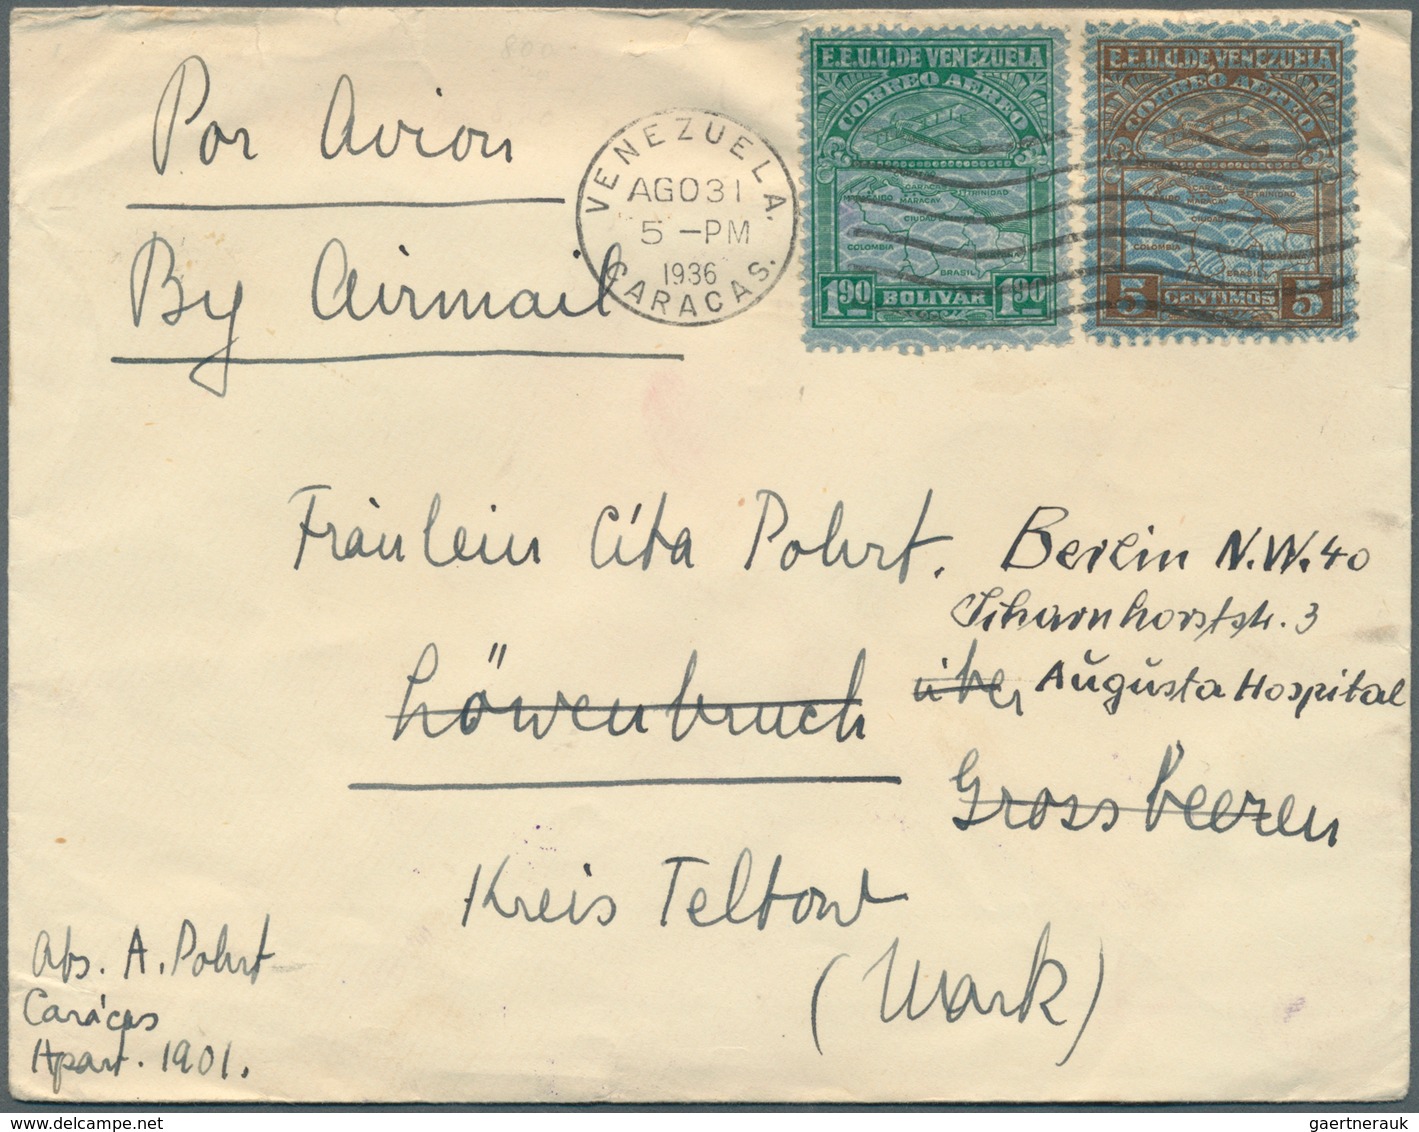 Übersee: 1880/1950, Some 300 covers and cards mainly USA with seven letters to Europe from around 18